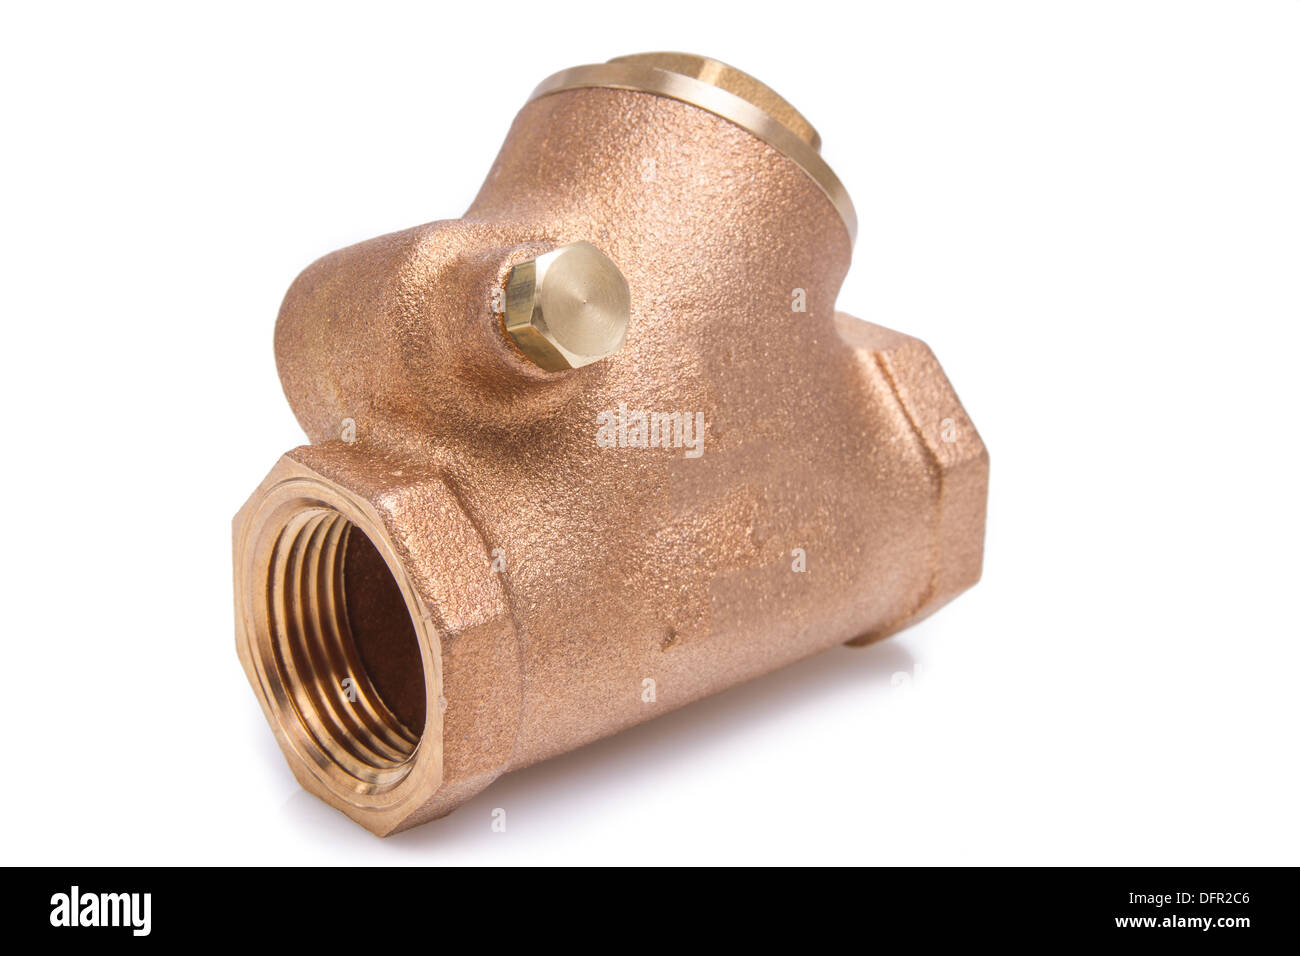 Fittings for water pipe brass joint. close-up Stock Photo